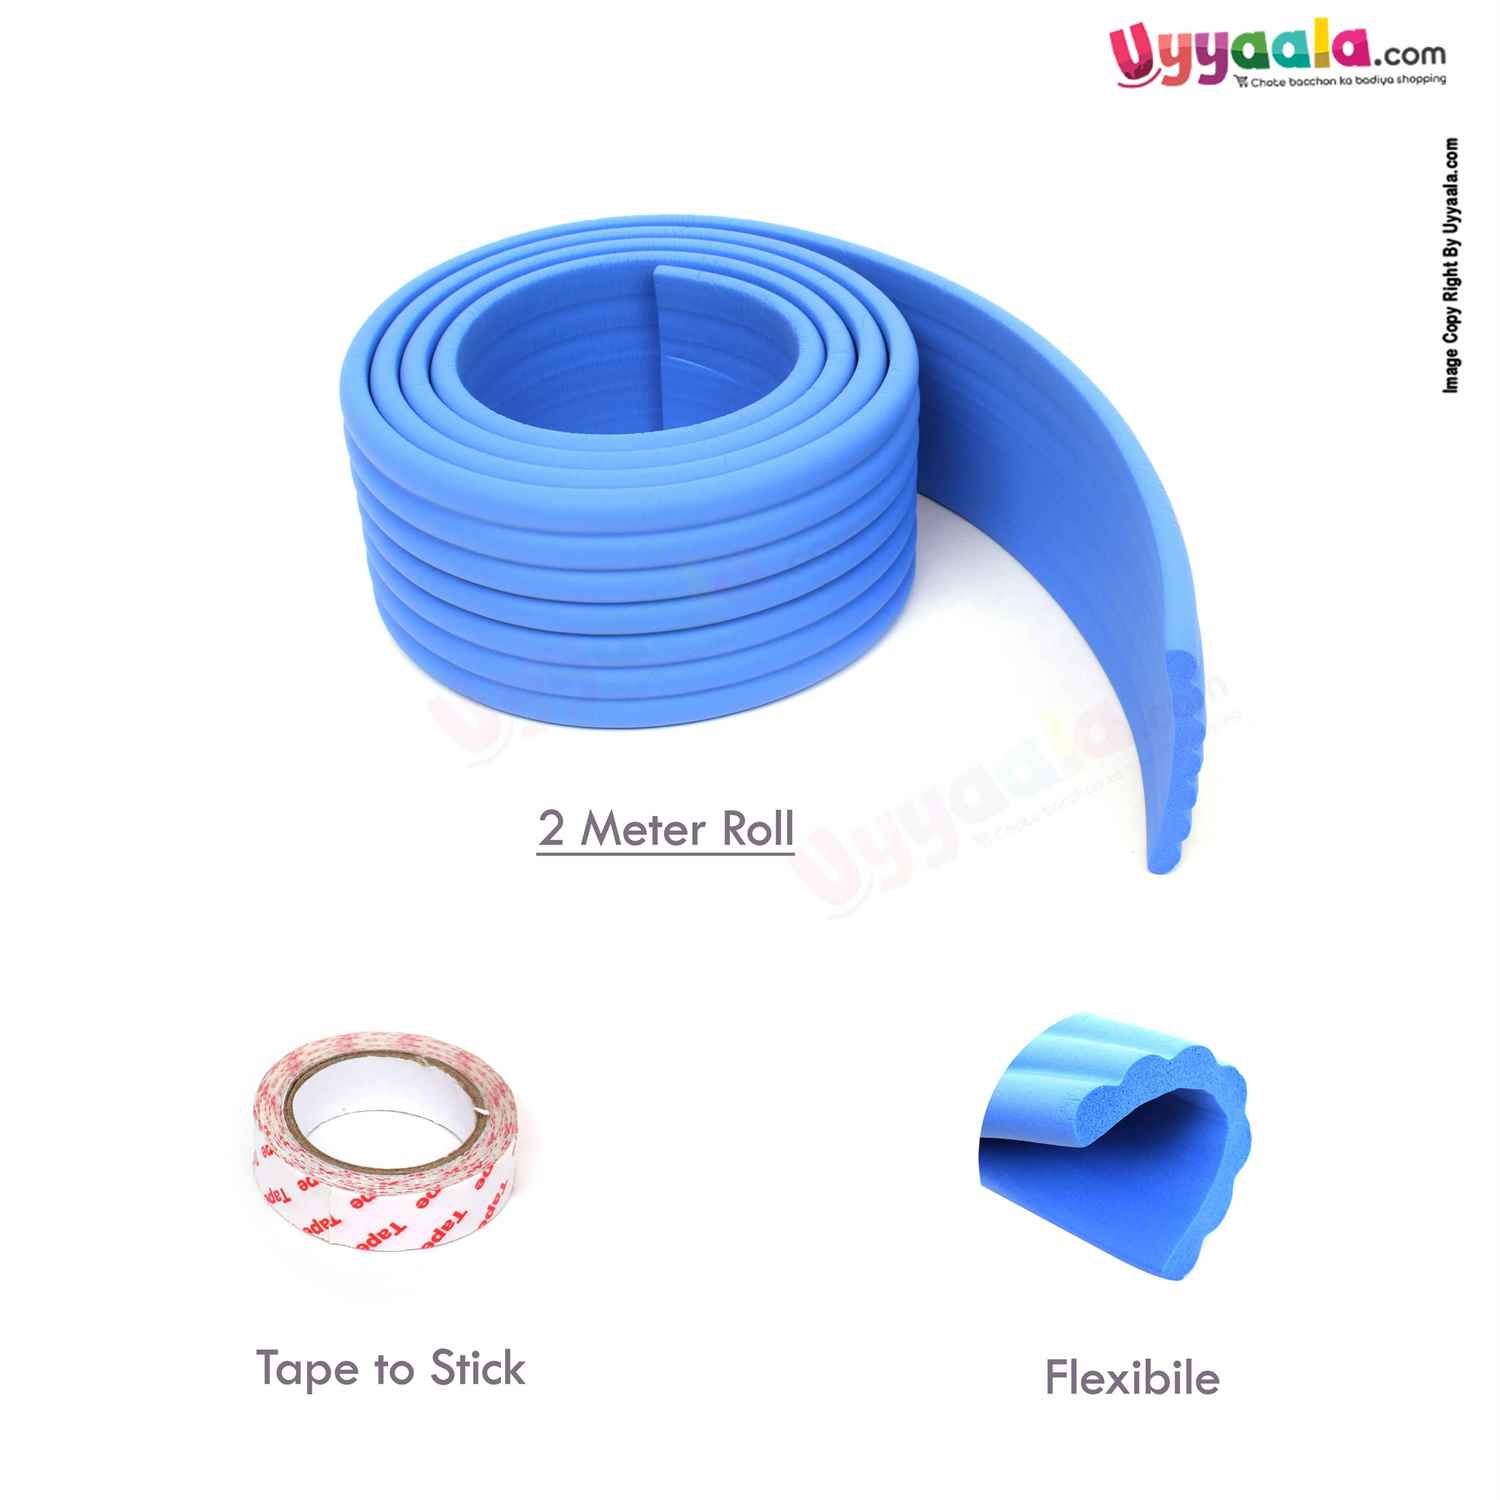 WEIKANG Safety Edge Guard for Babies 2 Meters 0+m age, Blue